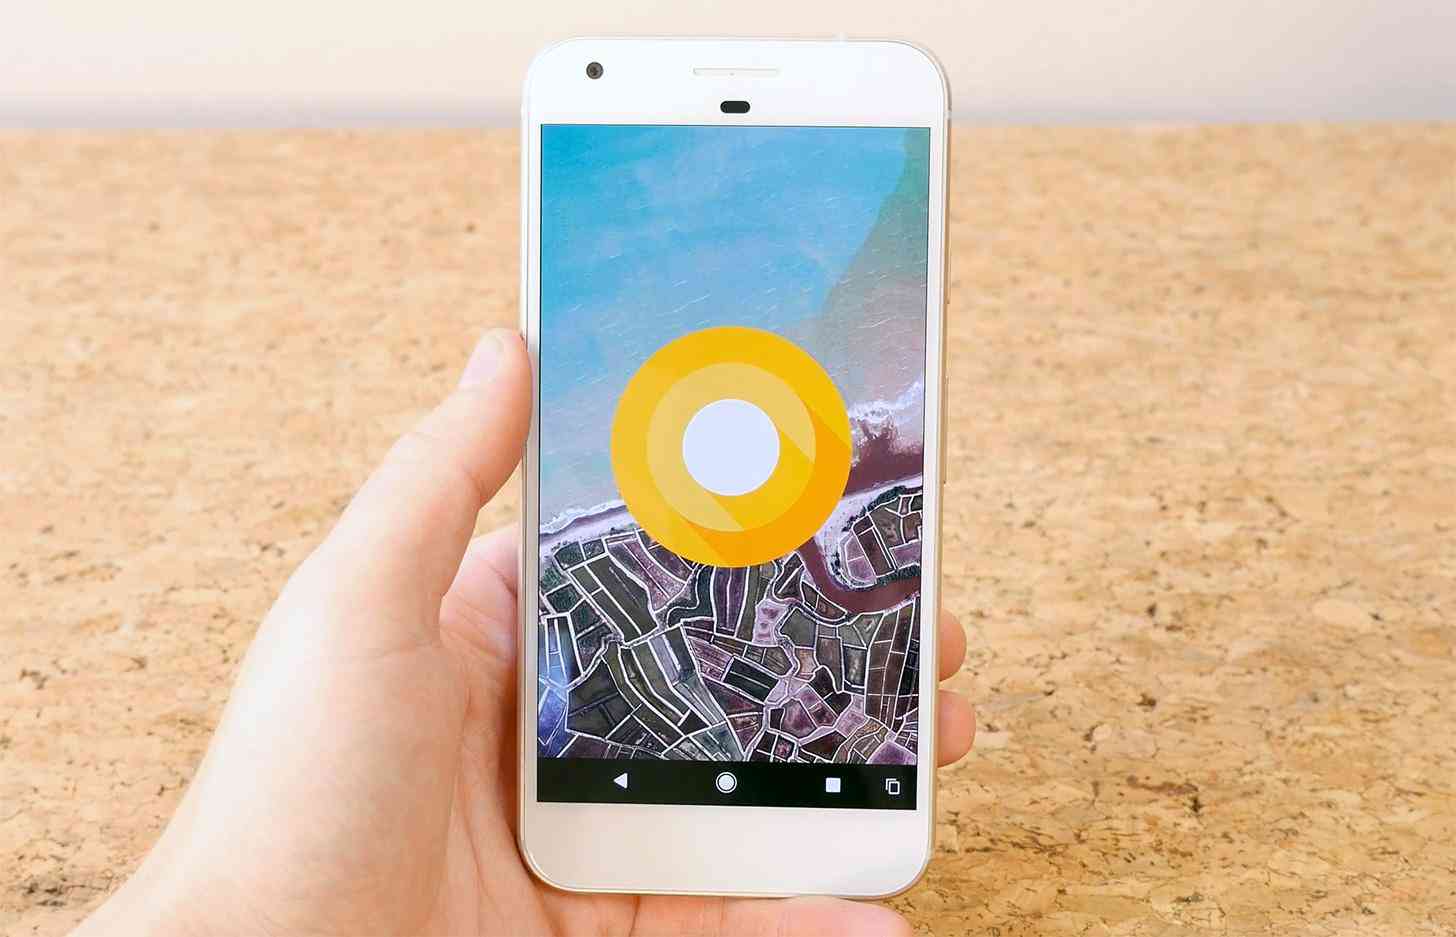 Android 8.0 Oreo Easter egg Google Pixel XL